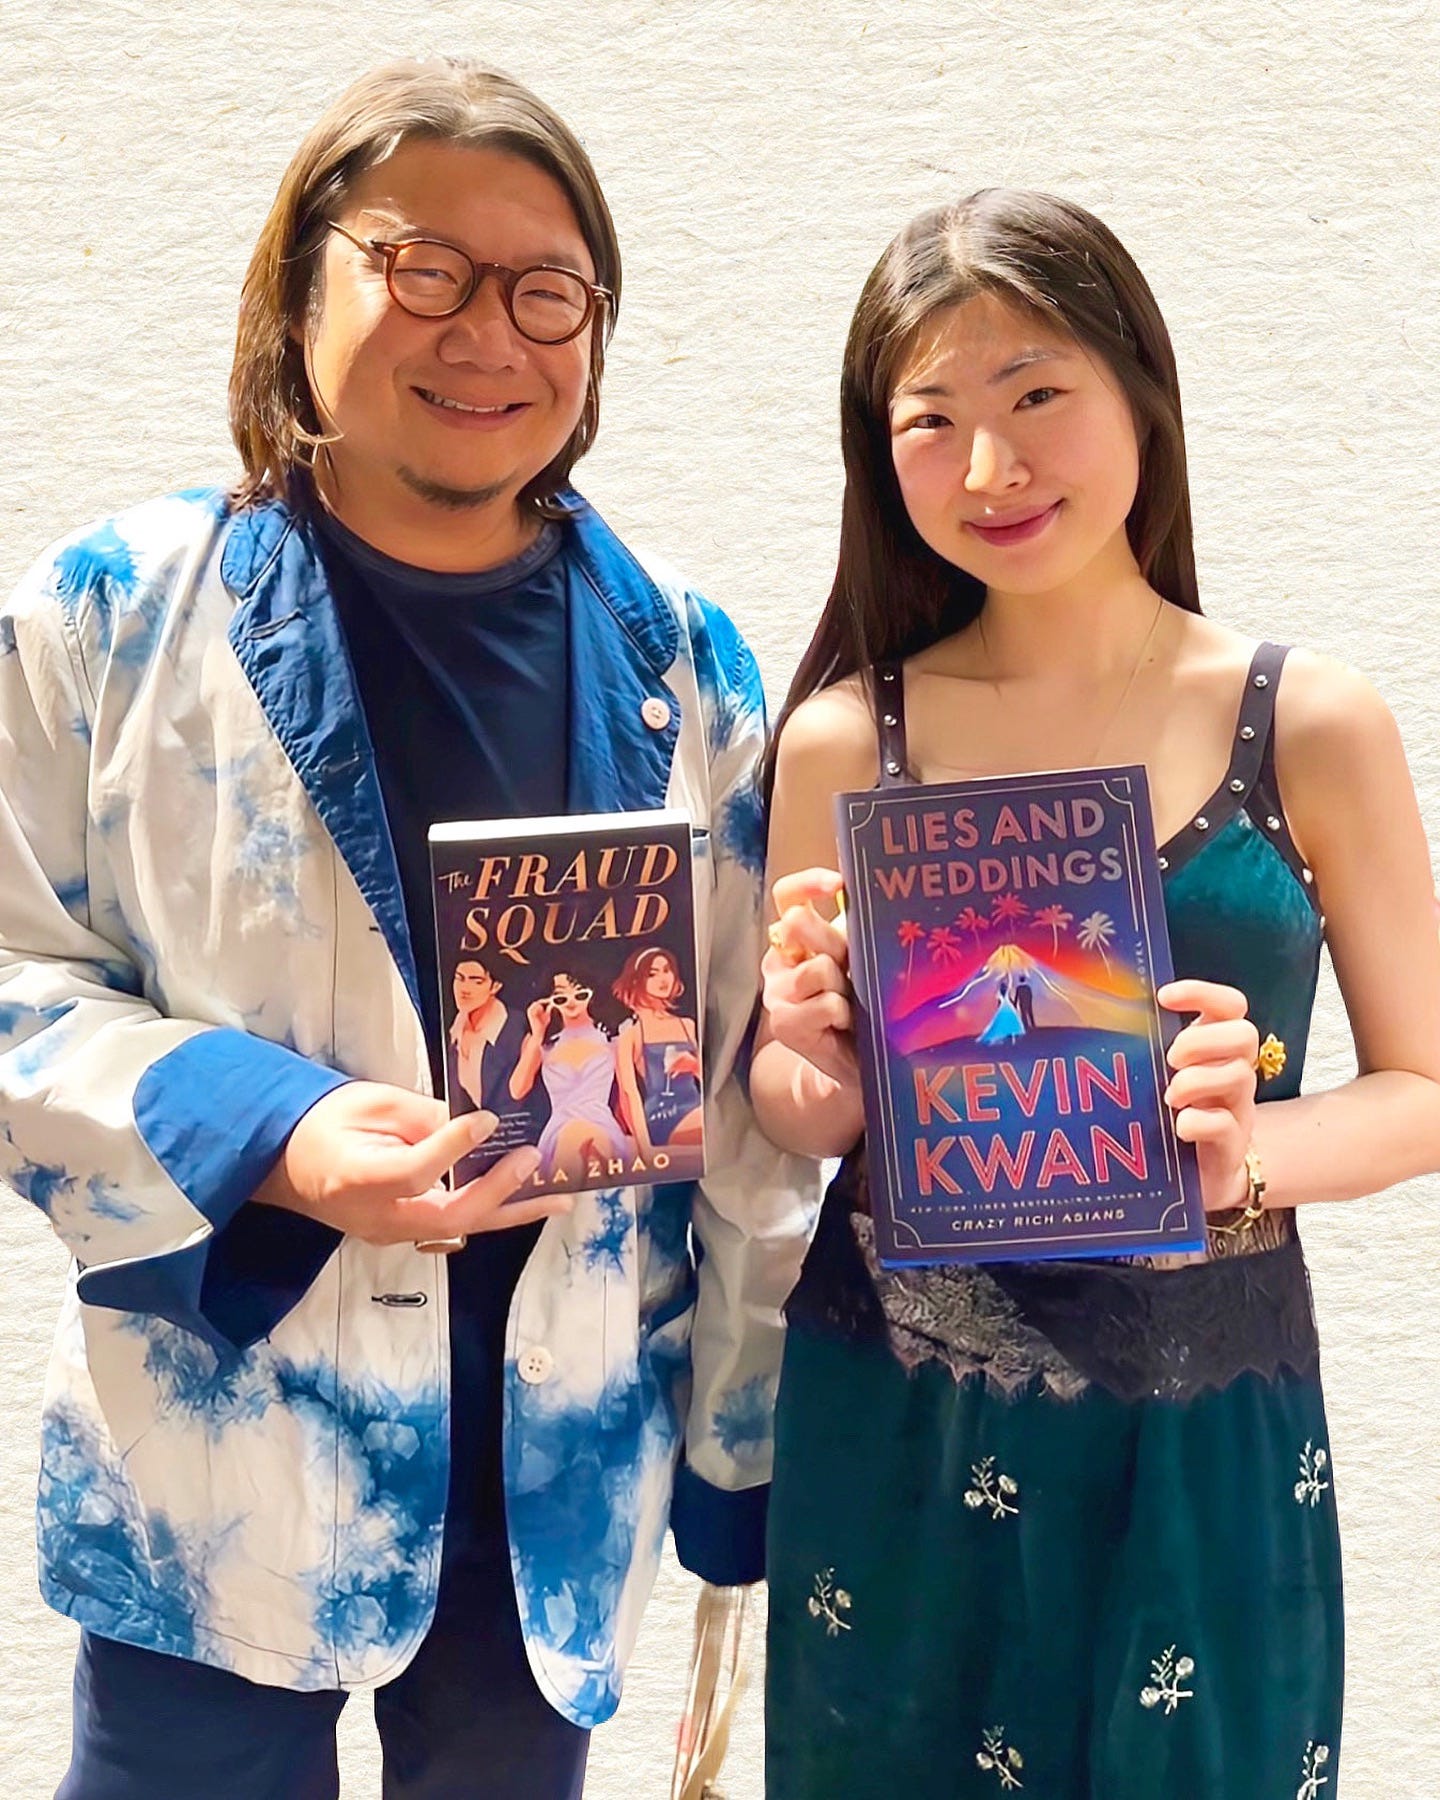 May be an image of ‎2 people and ‎text that says '‎FRAUD SOUAD LIESAND LIES AND WEDDINGS 补头头公牛素 ZHAO صوم KEVIN KWAN CЛAΣT RICH RICH DIANG CRARE‎'‎‎